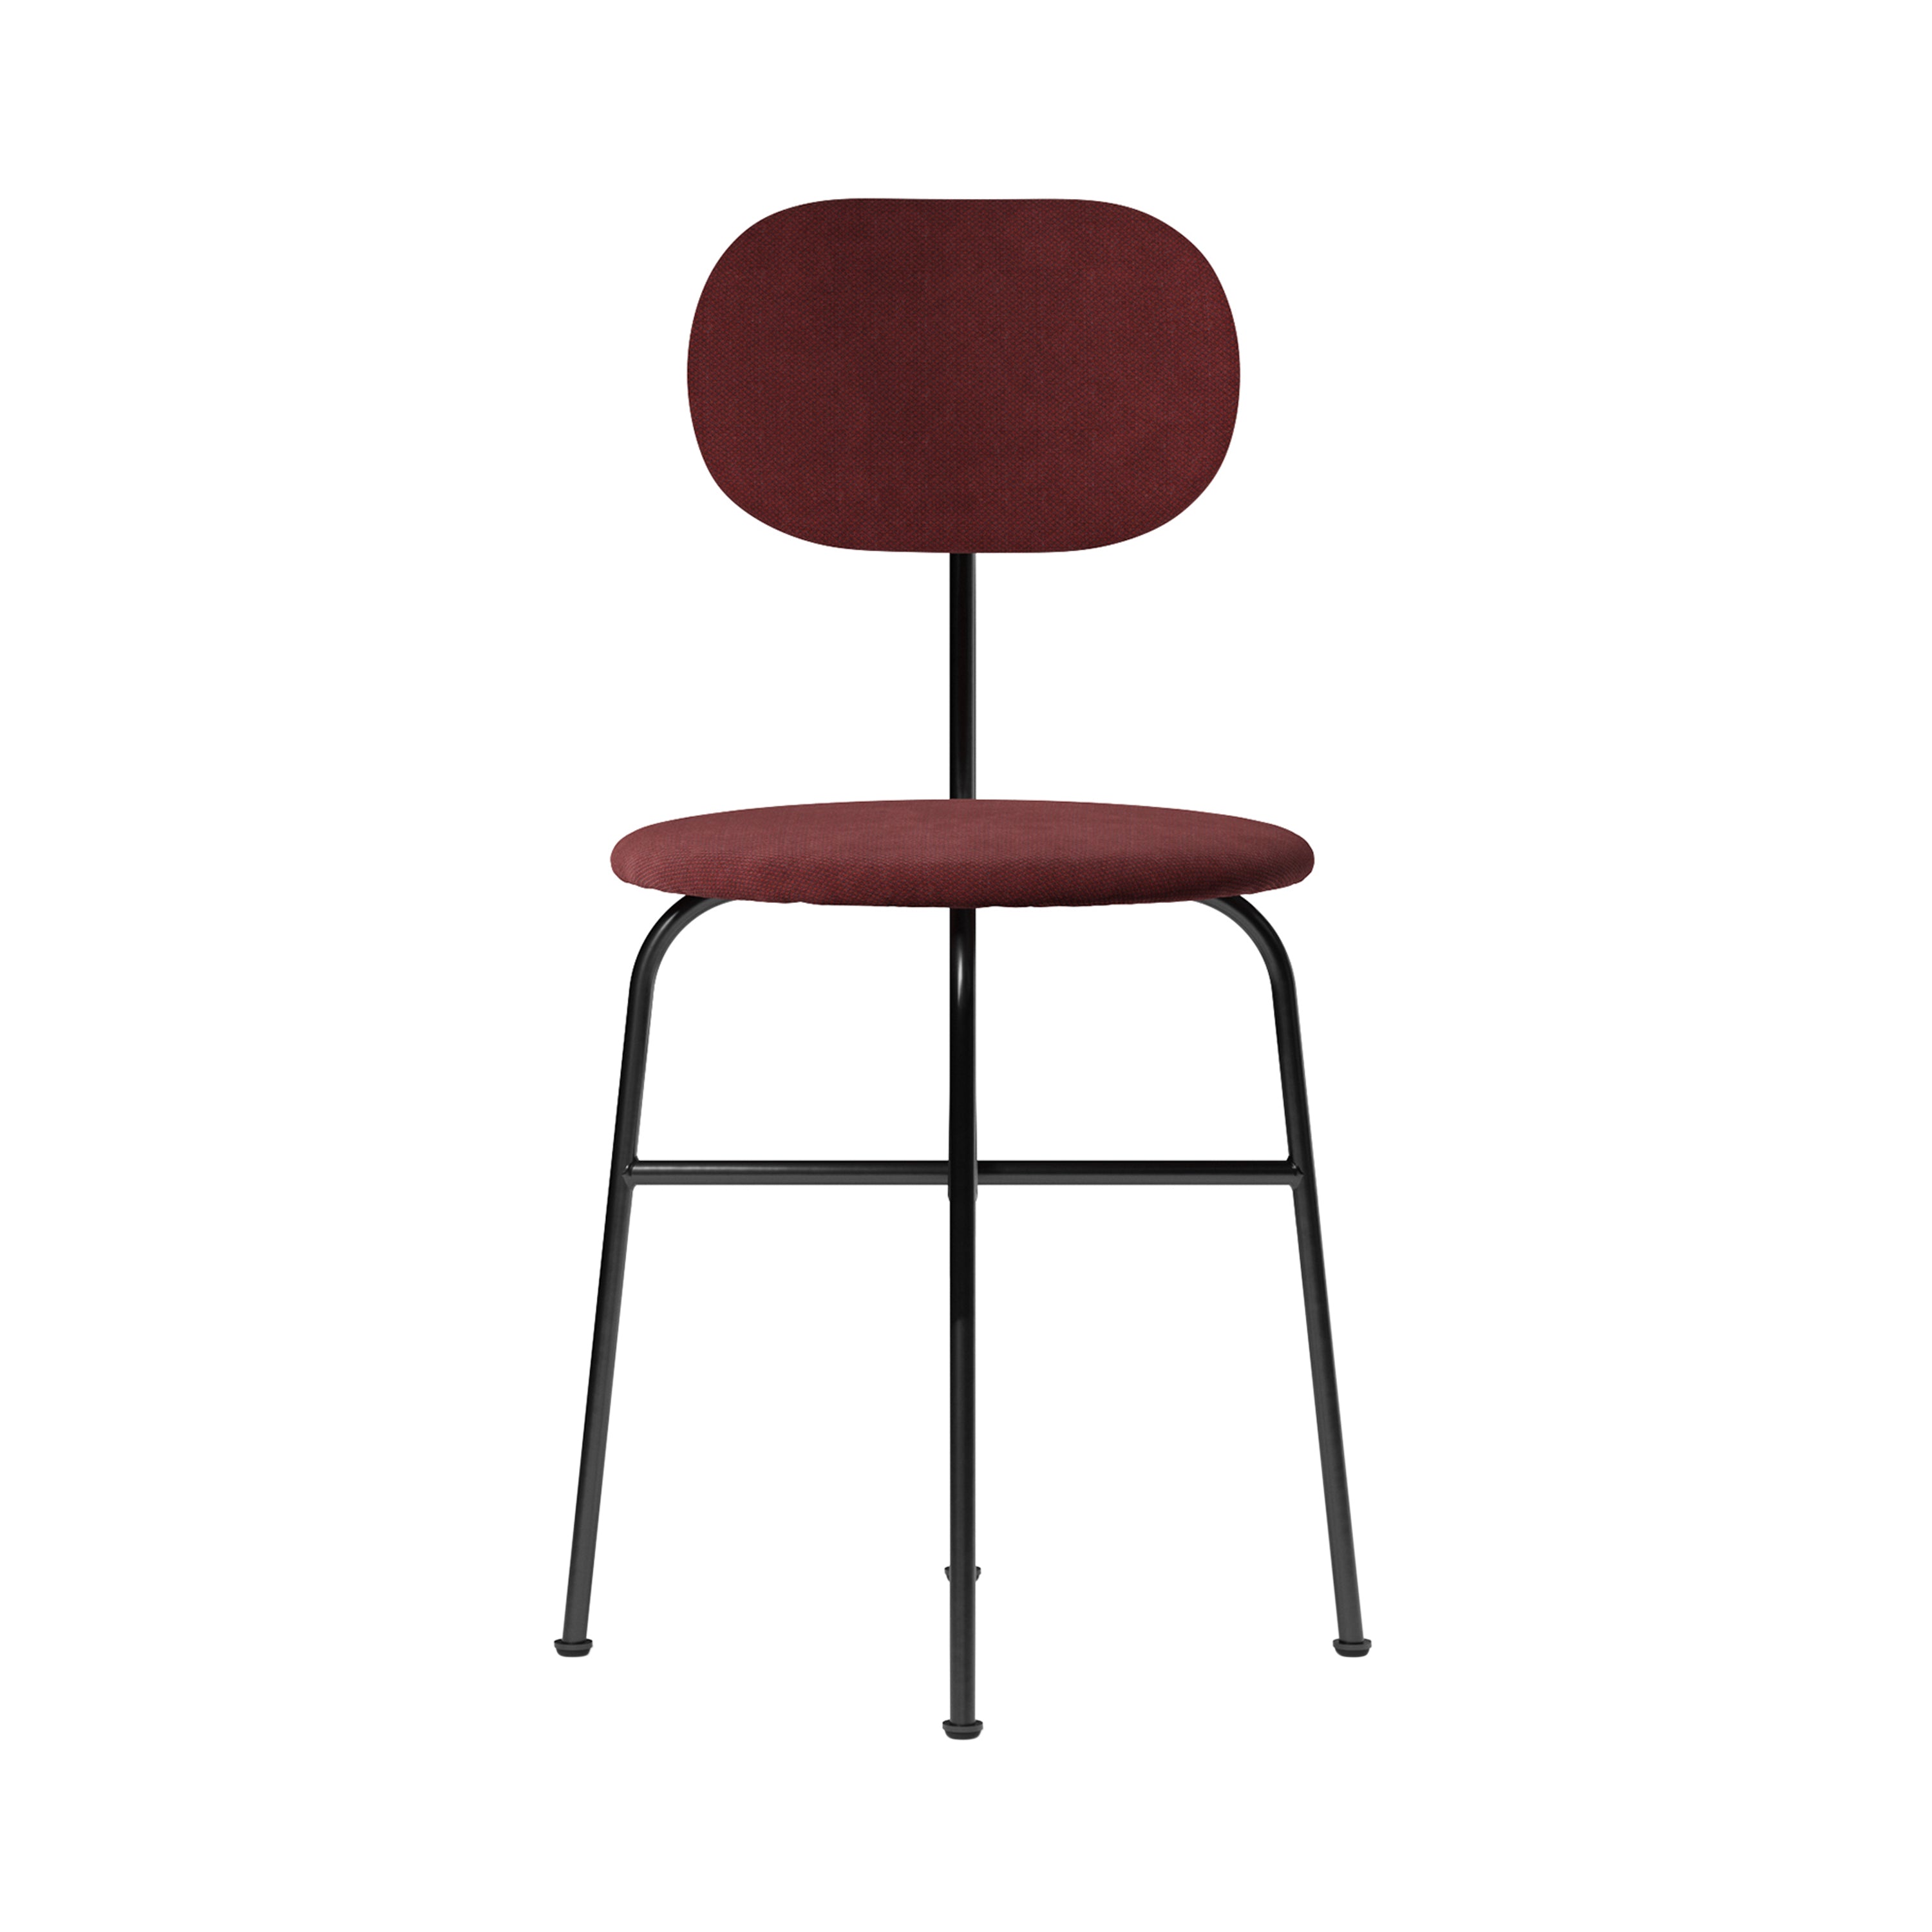 Afteroom Dining Chair Plus: Fully Upholstered + Fiord2 581